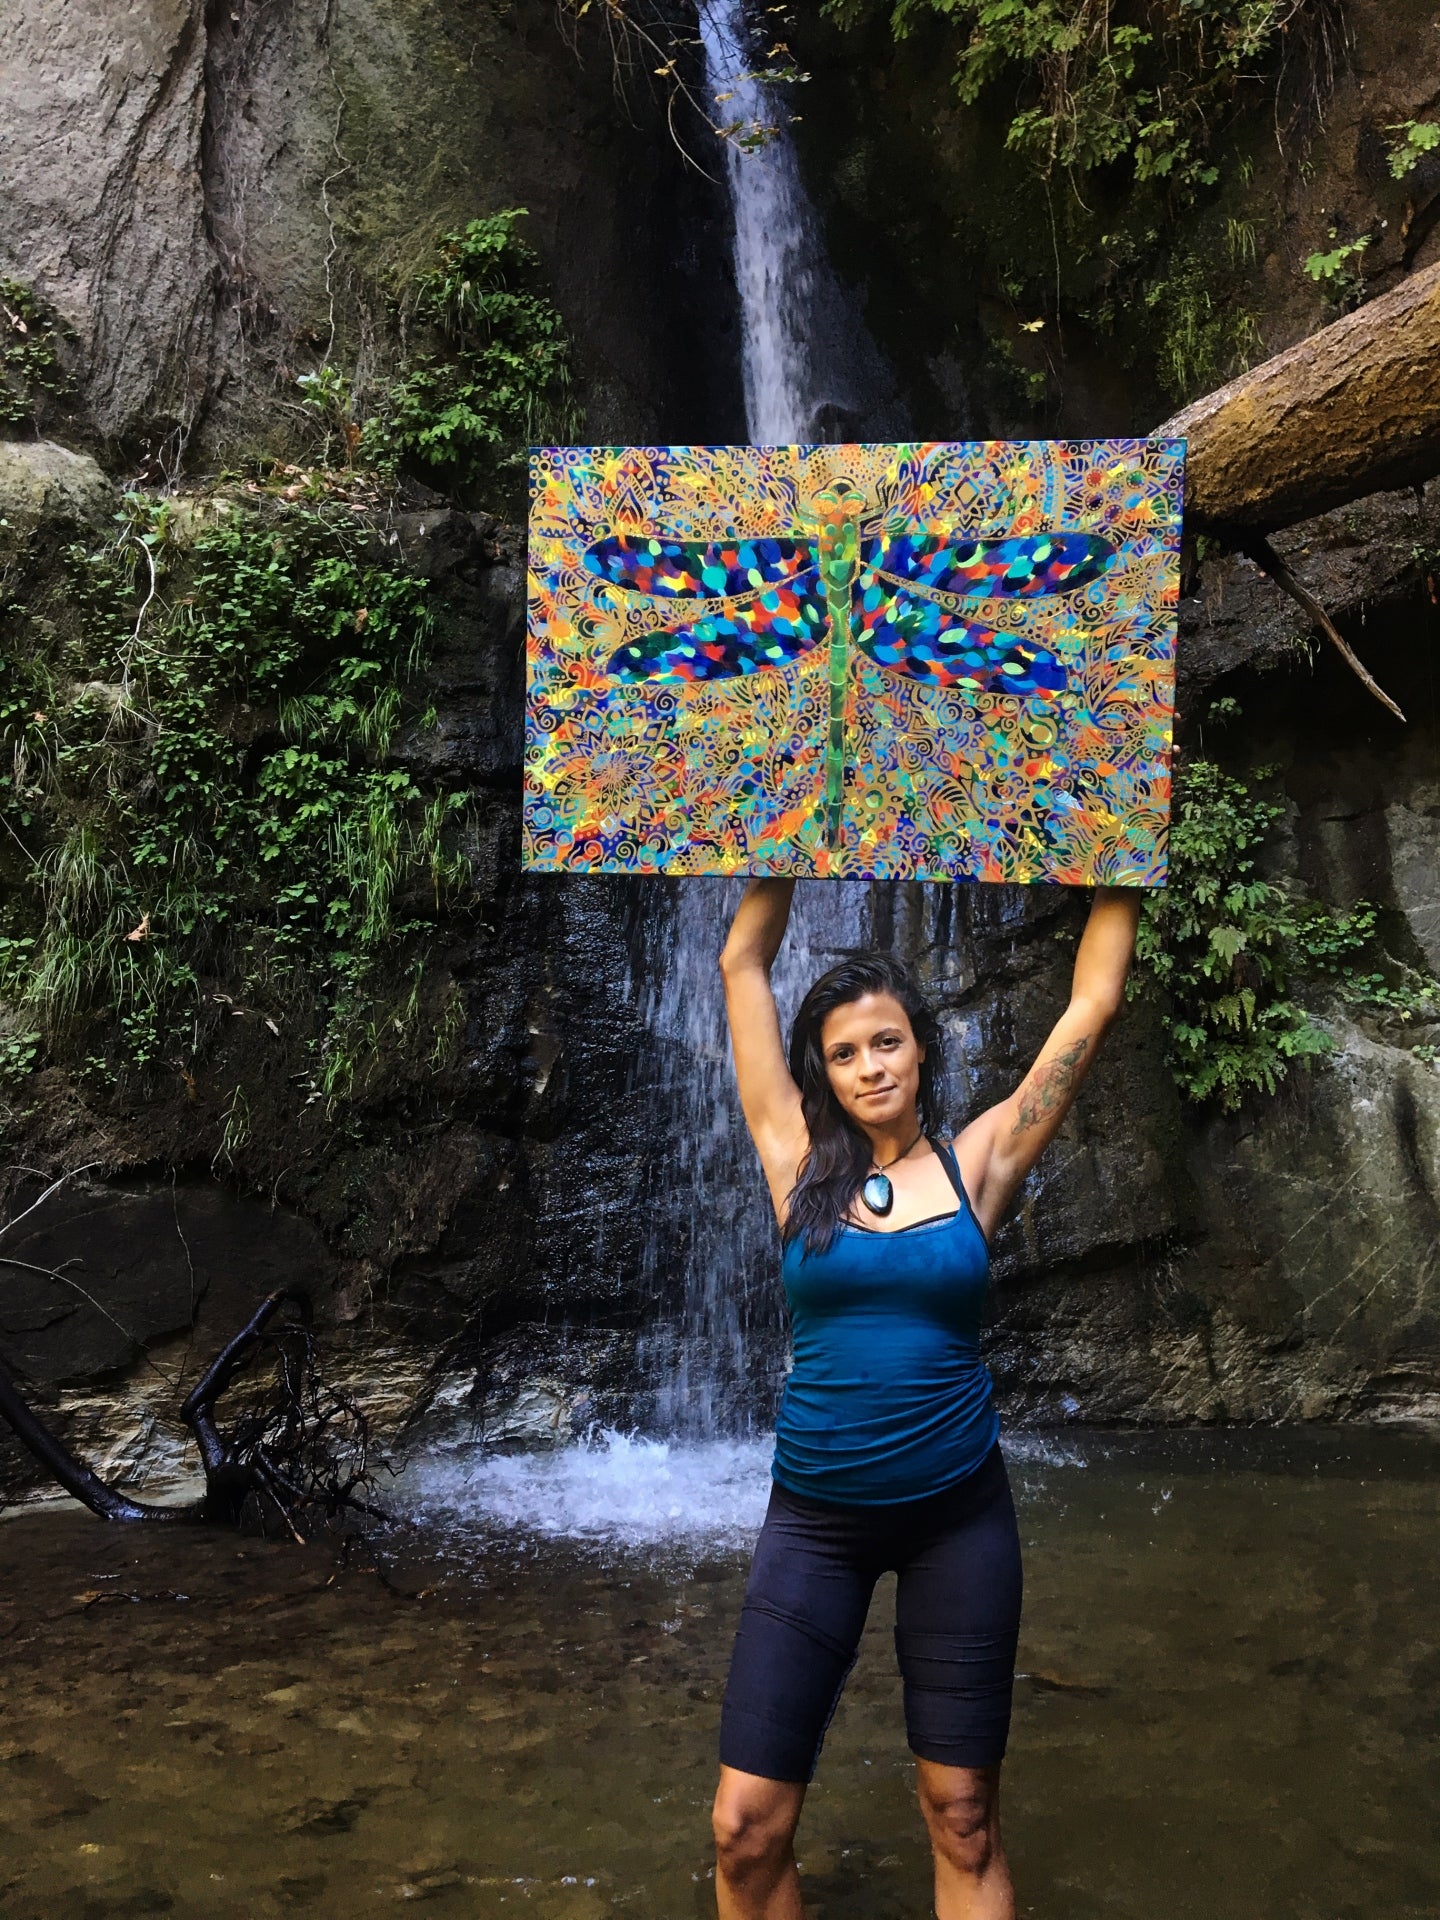 Holding dragonfly painting in front of waterfall